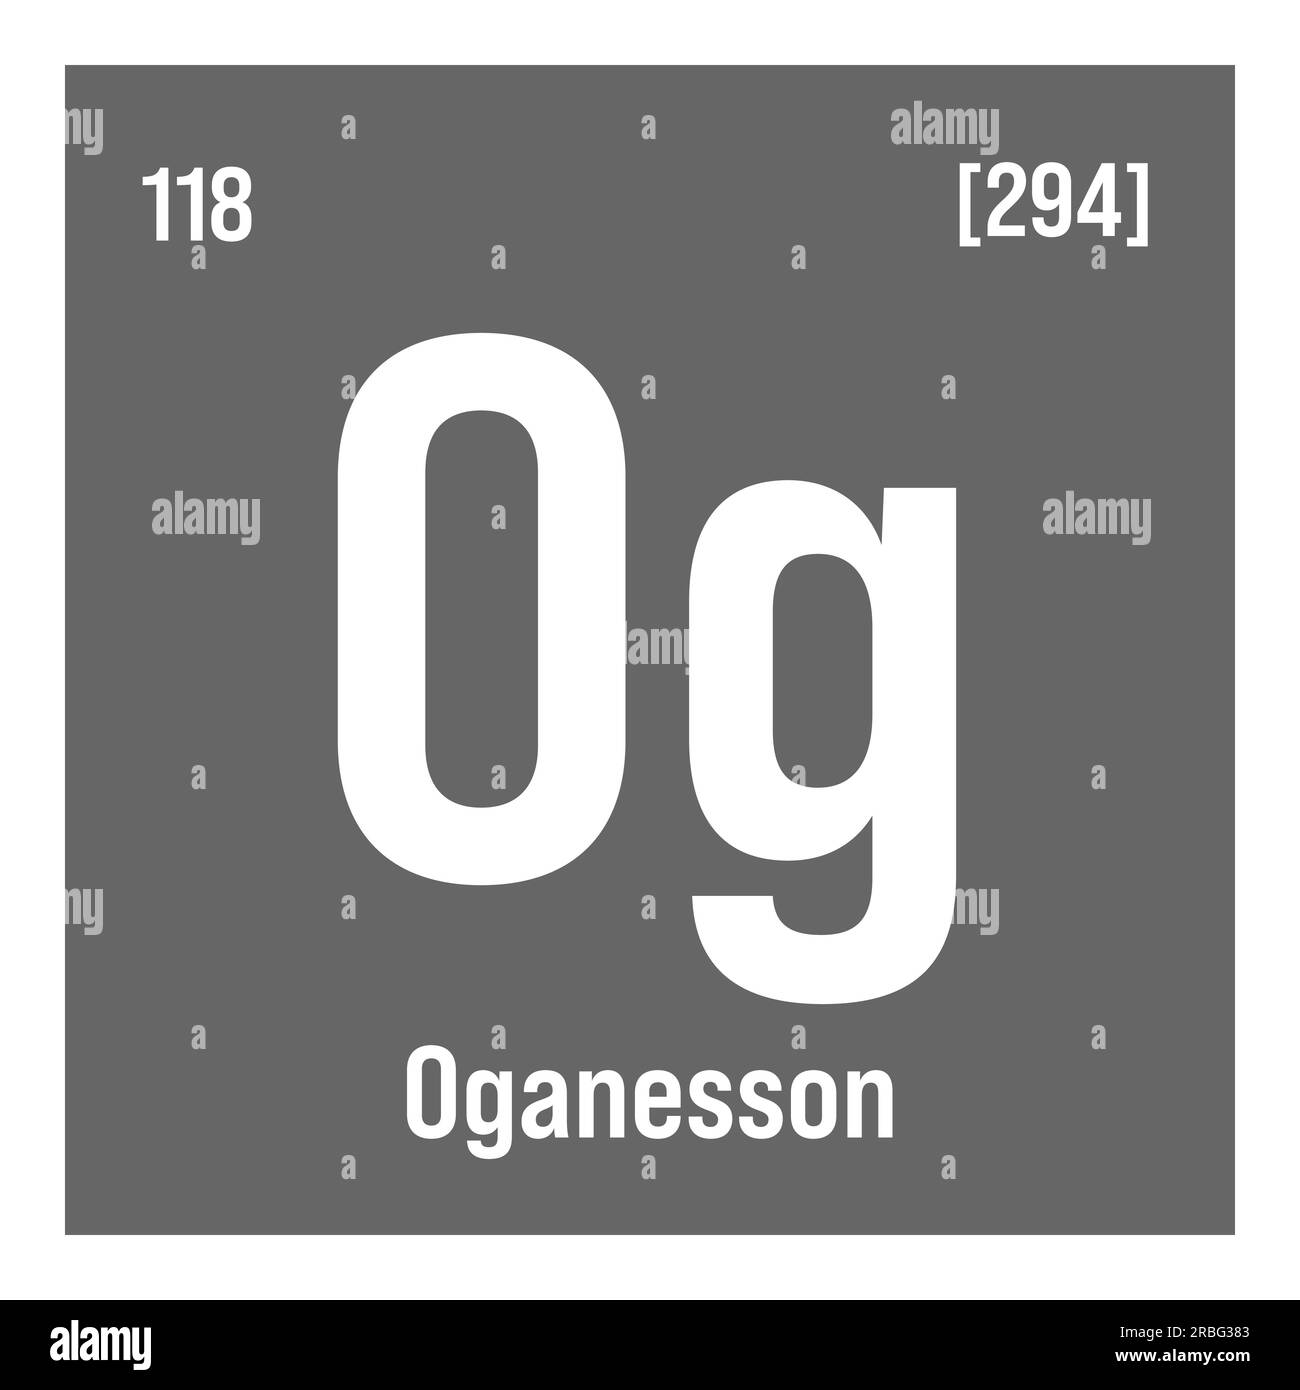 Oganesson, Og, periodic table element with name, symbol, atomic number and weight. Synthetic element with very short half-life, created through nuclear reactions in a laboratory. Its properties are not well understood due to its instability. Stock Vector